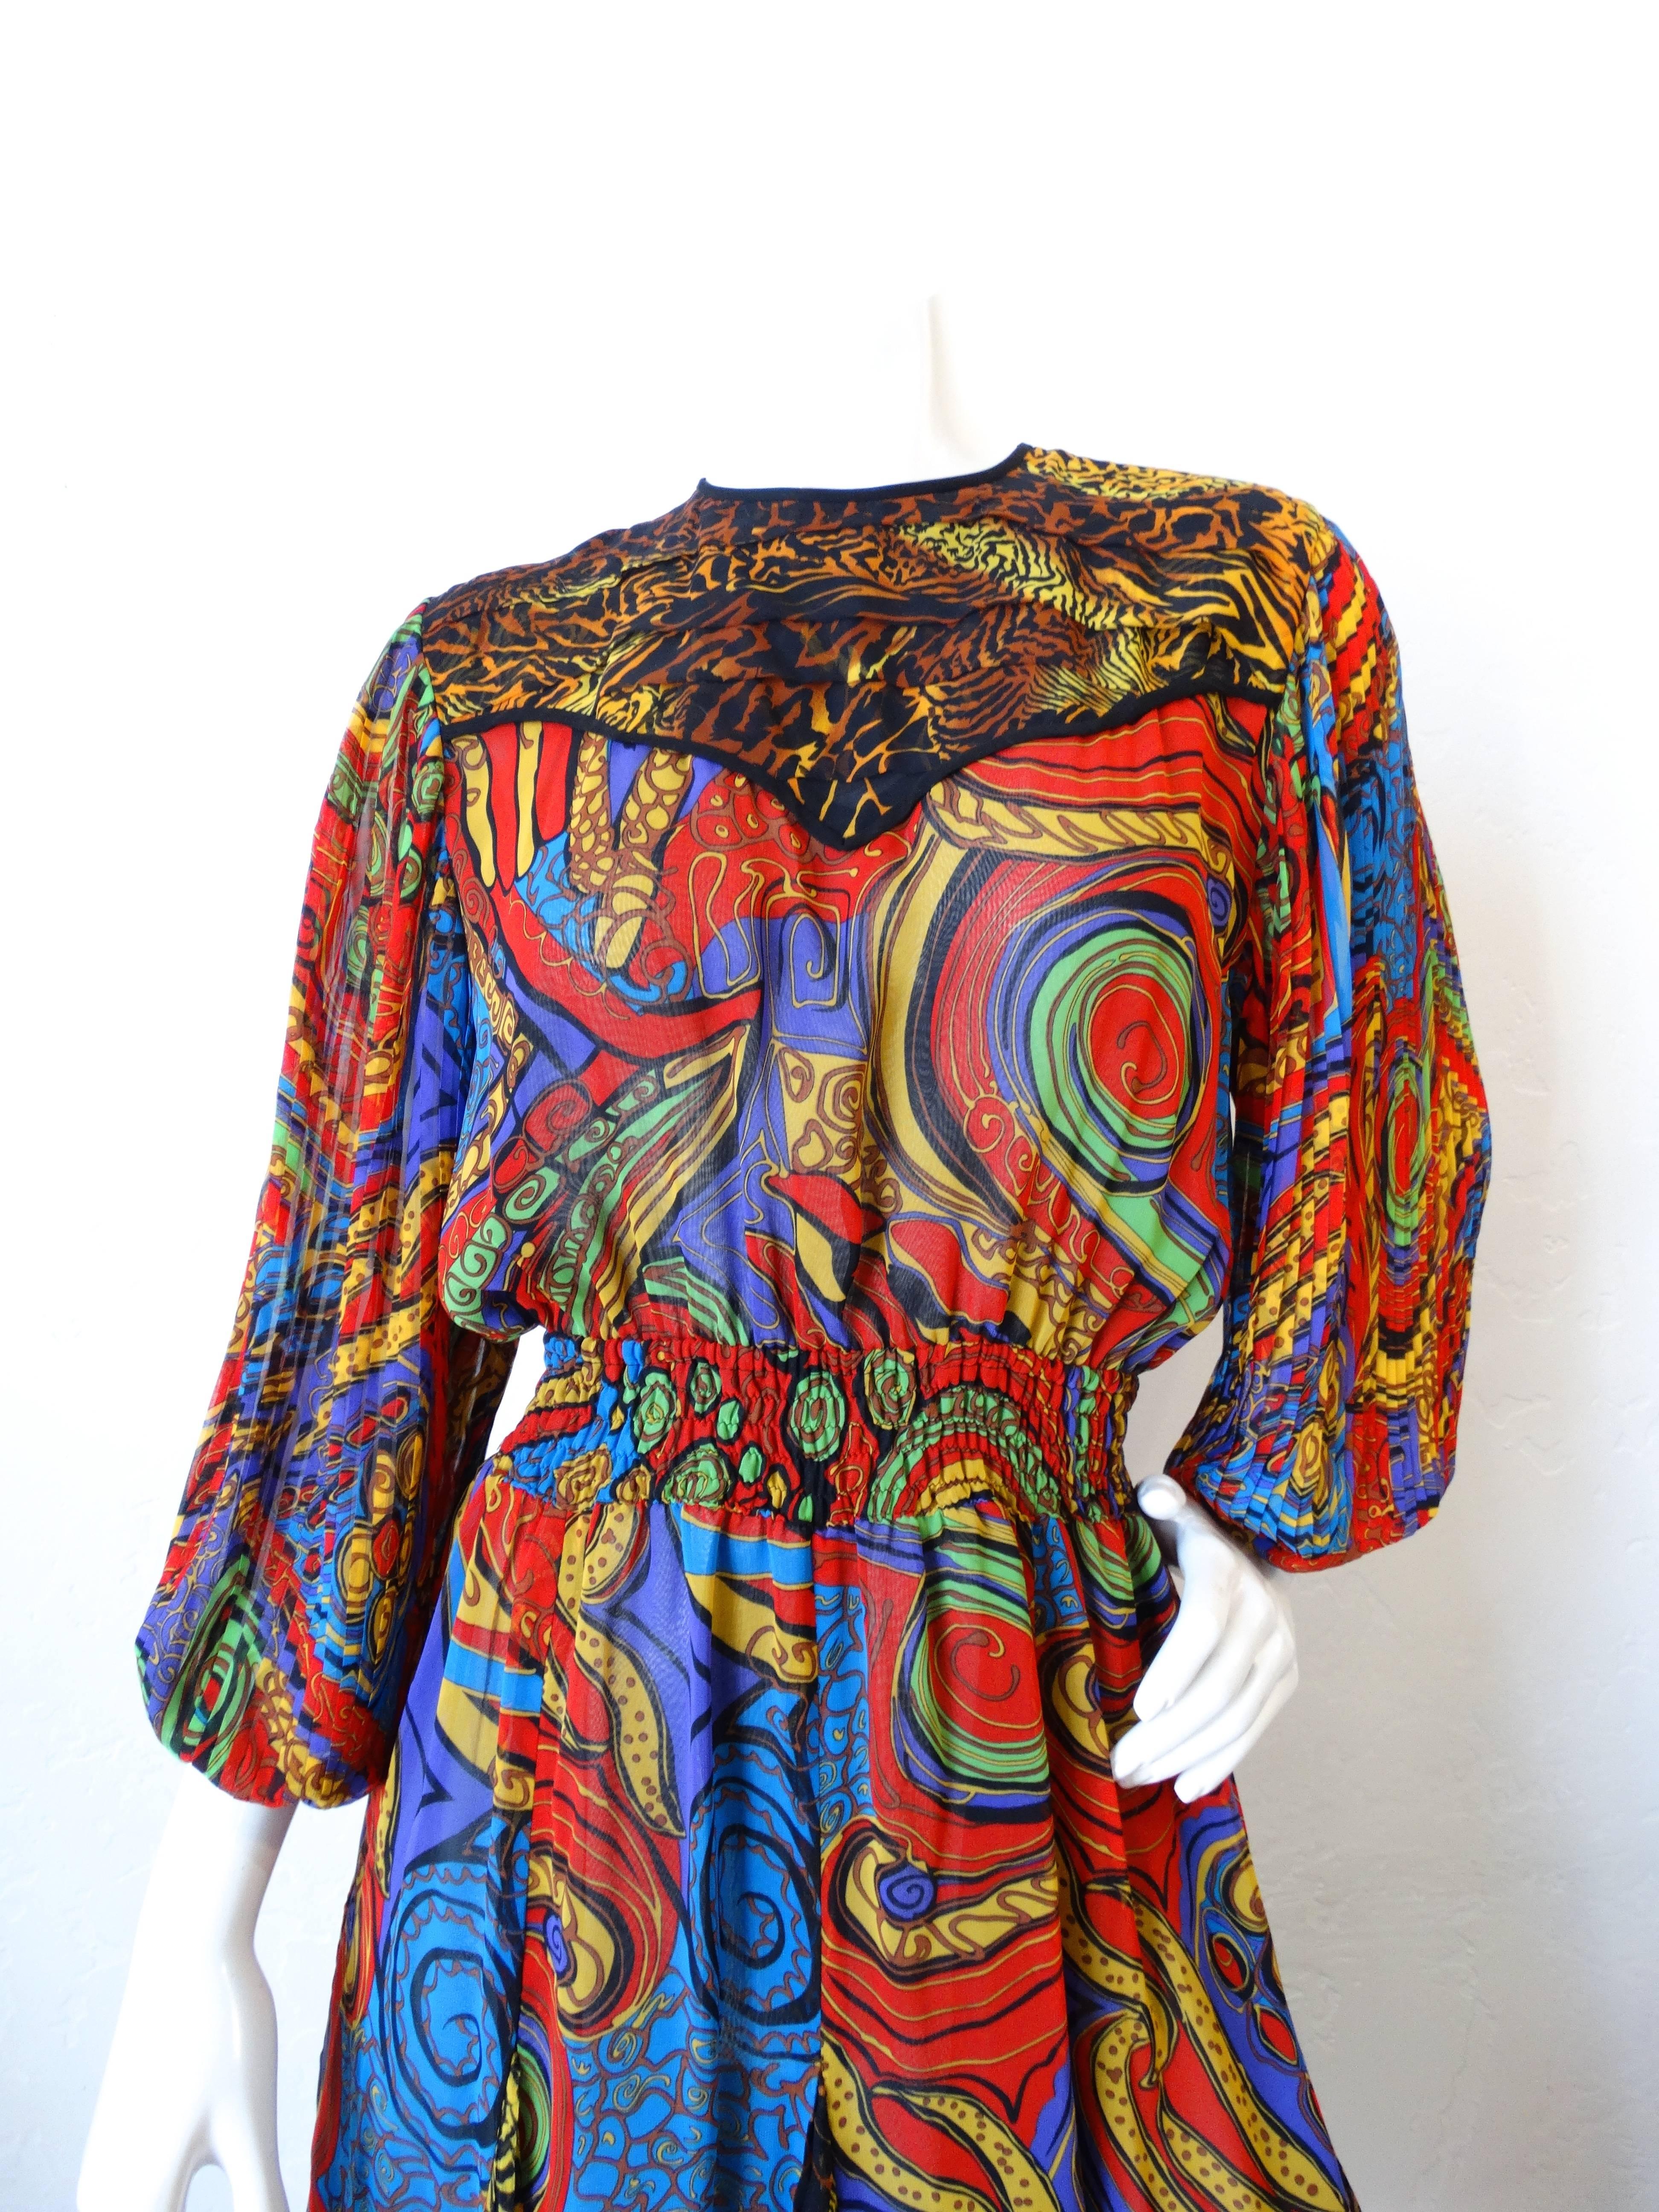 Diane Freis fans rejoice! This incredible 1980s Diane Freis dress in printed in brilliant swirling colors with contrasting leopard print pattern on the yoke. Blouson sleeves, with permanently pleated texture. Flattering elasticized waistline allows